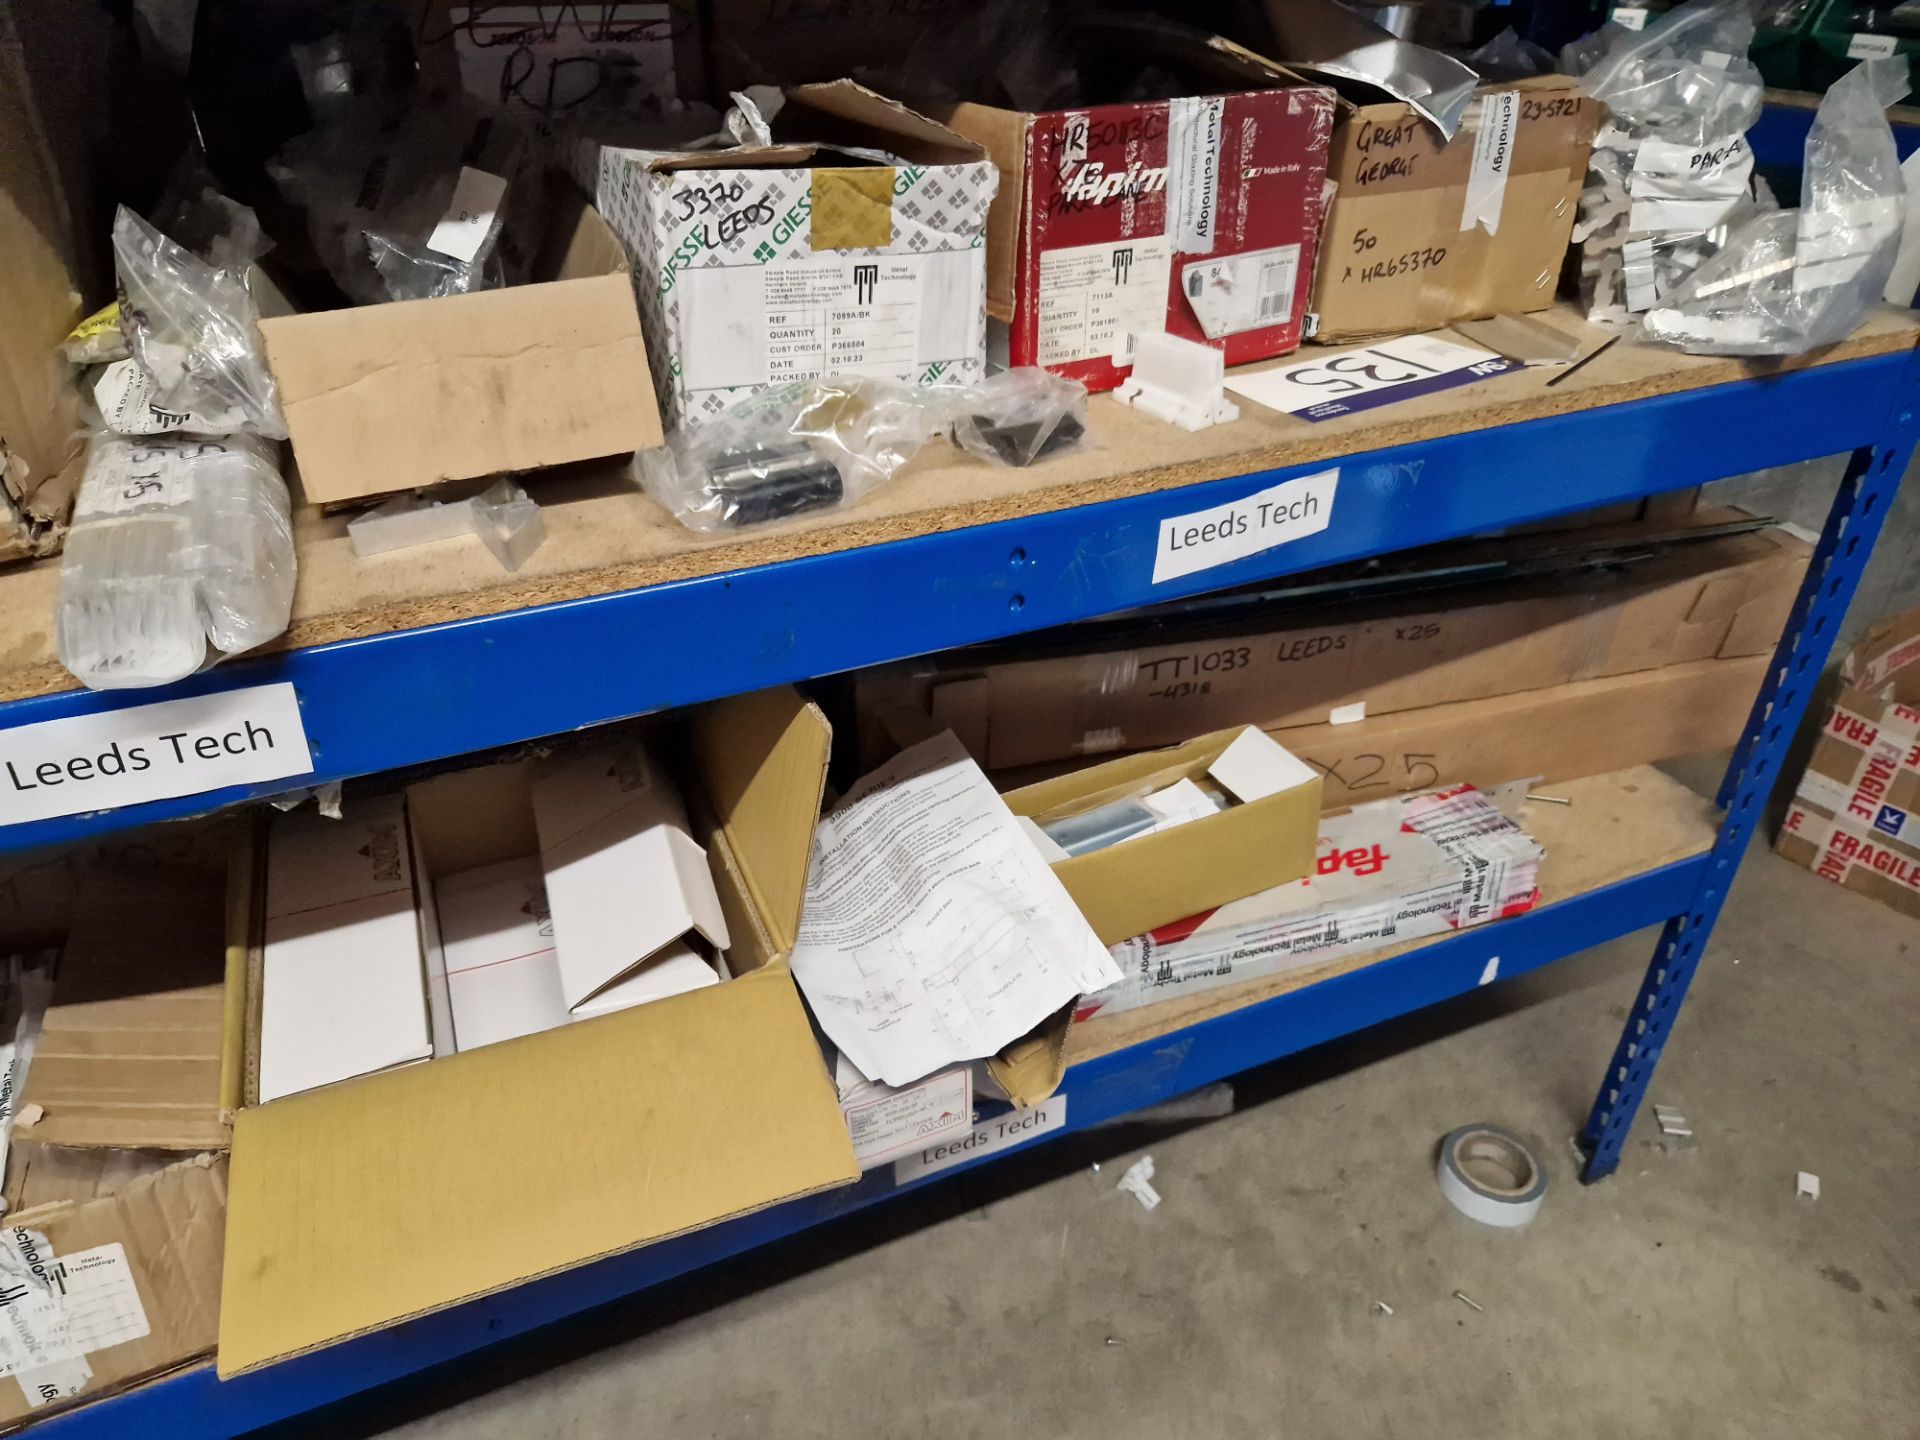 Contents to Four Bays of Shelving, including Rubber Gaskets, Aluminium Profile, End Caps, Screws, - Image 8 of 13